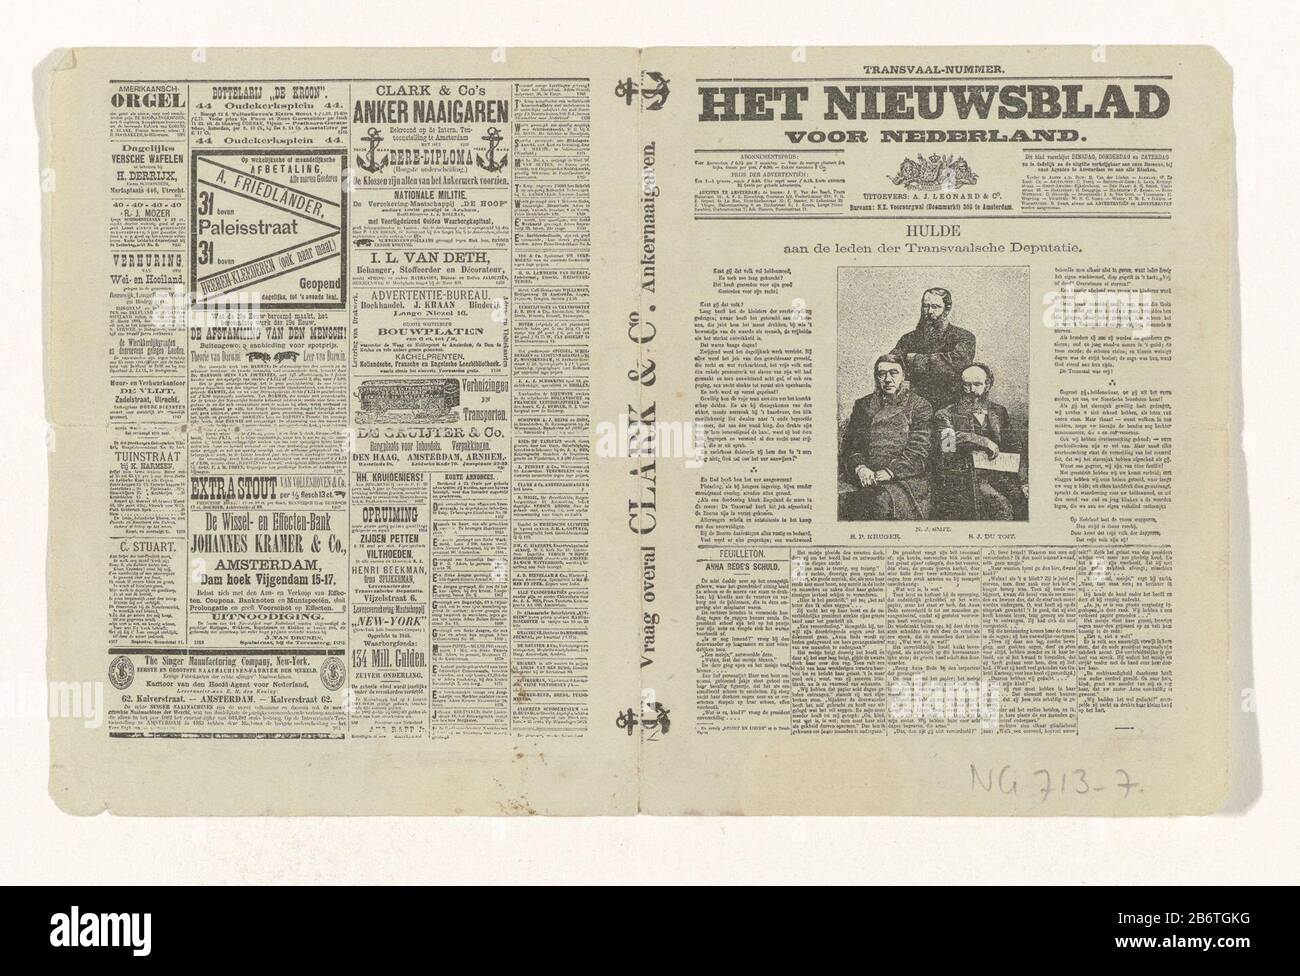 Het Nieuwsblad voor Nederland Double Folded miniature newspaper (4pp.) With  the front Dutch arm with two reclining lions and photograph of three men  (SP Kruger, NJ Smith and SJ du Toit). On